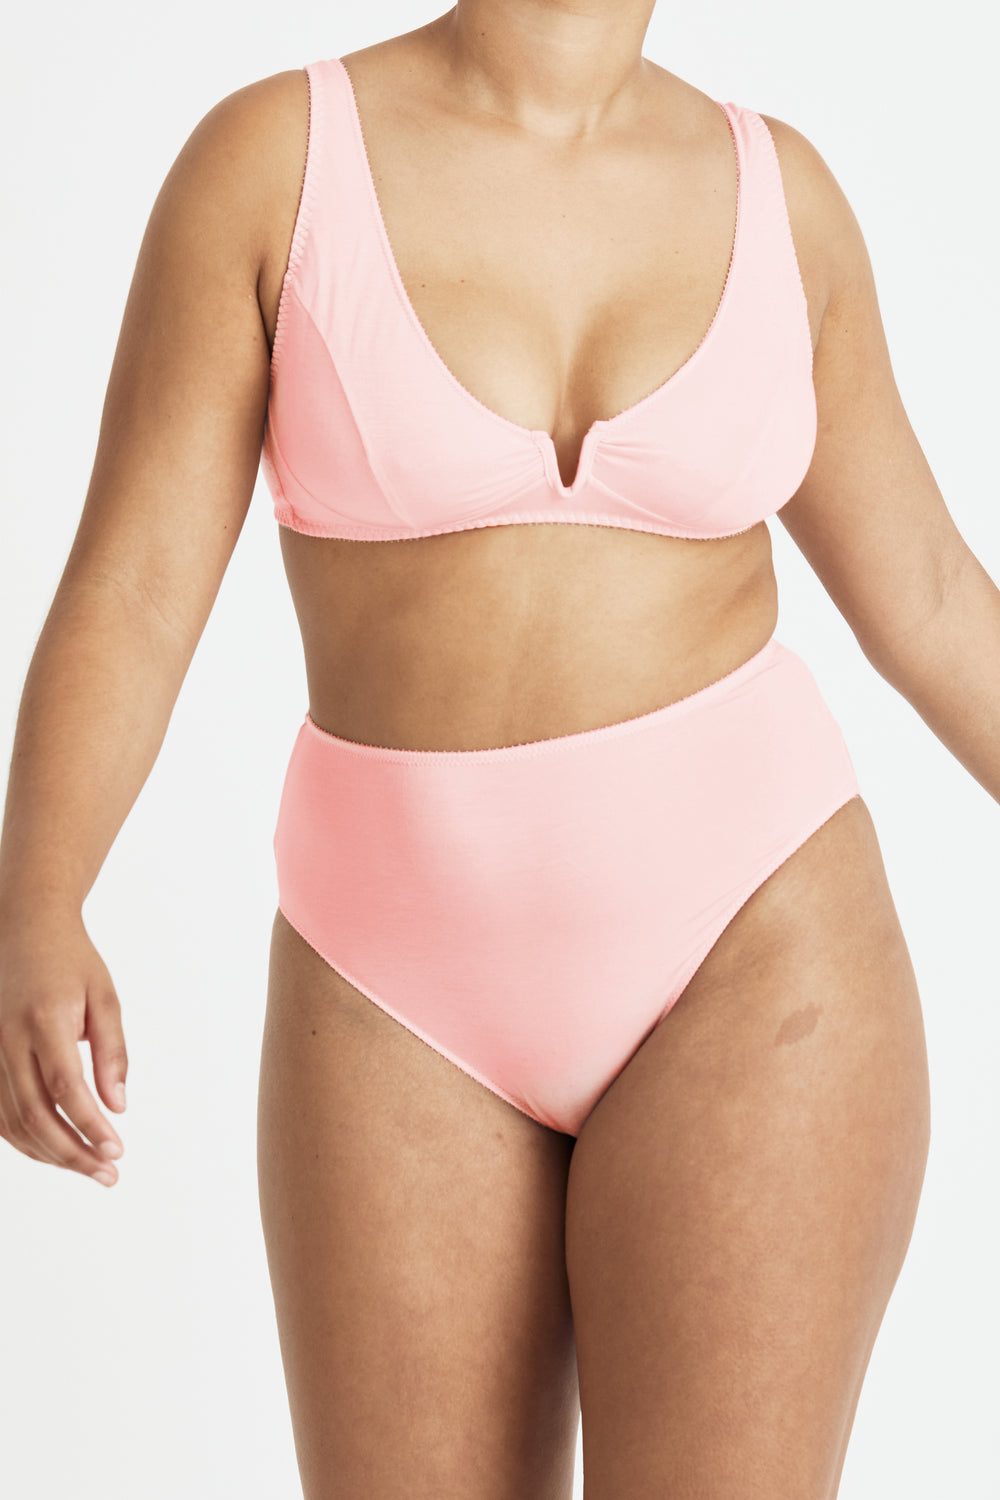 Videris Lingerie Sarah underwire free soft cup bra in blush pink TENCEL™ features a scooped plunge cup and front gathers